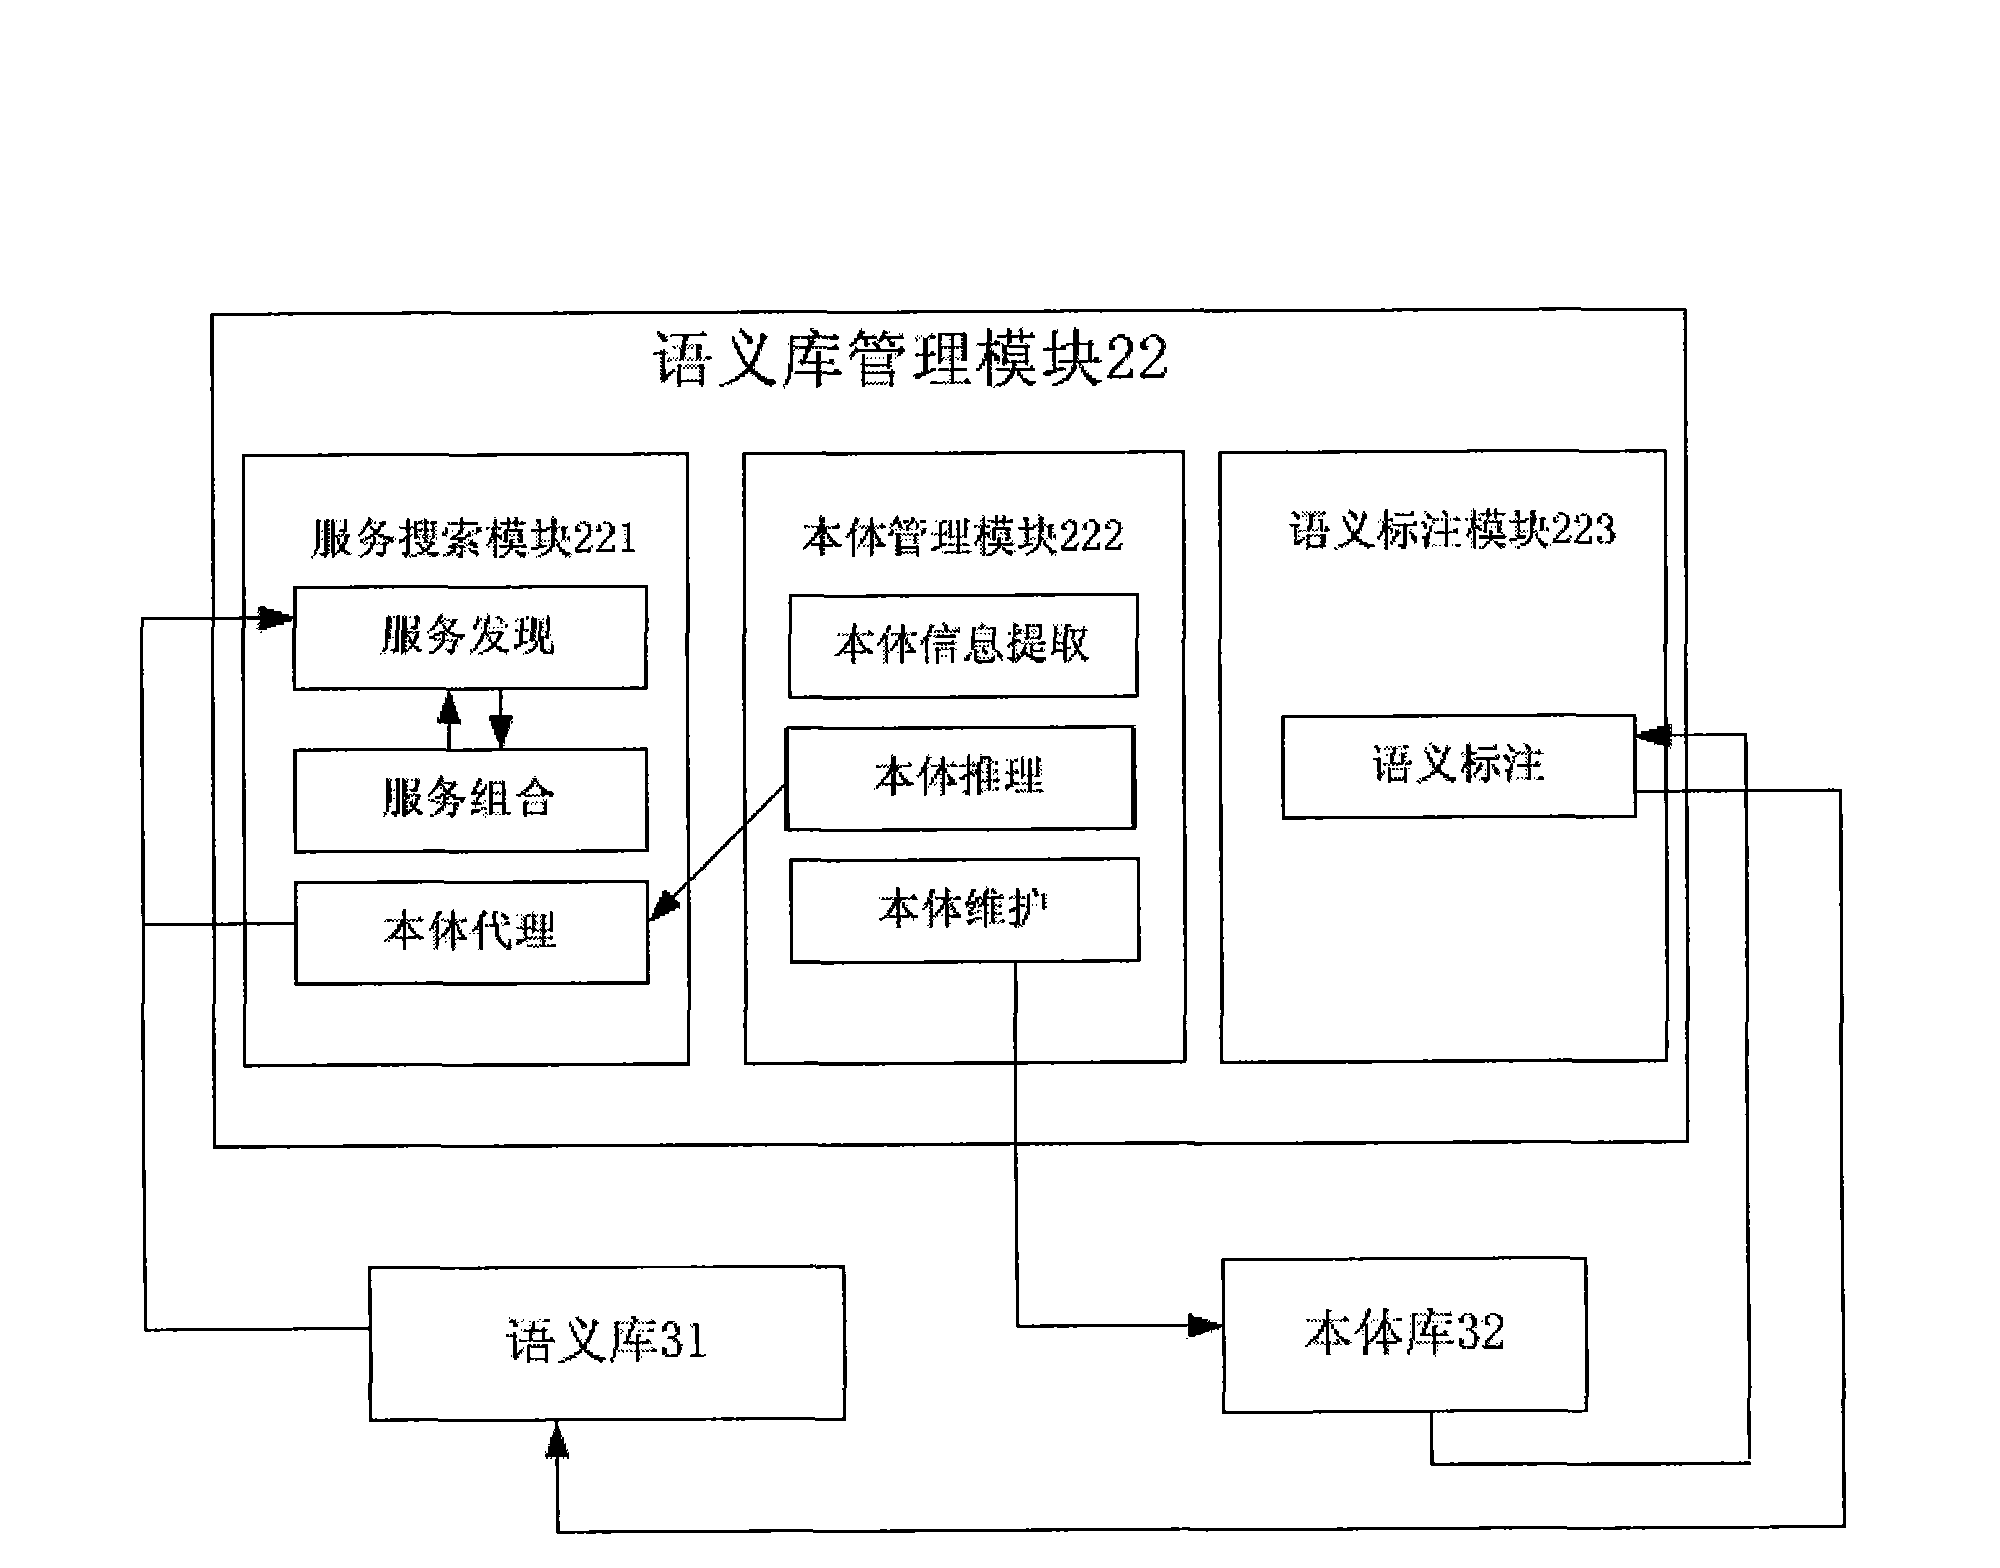 Service discovery and combination device